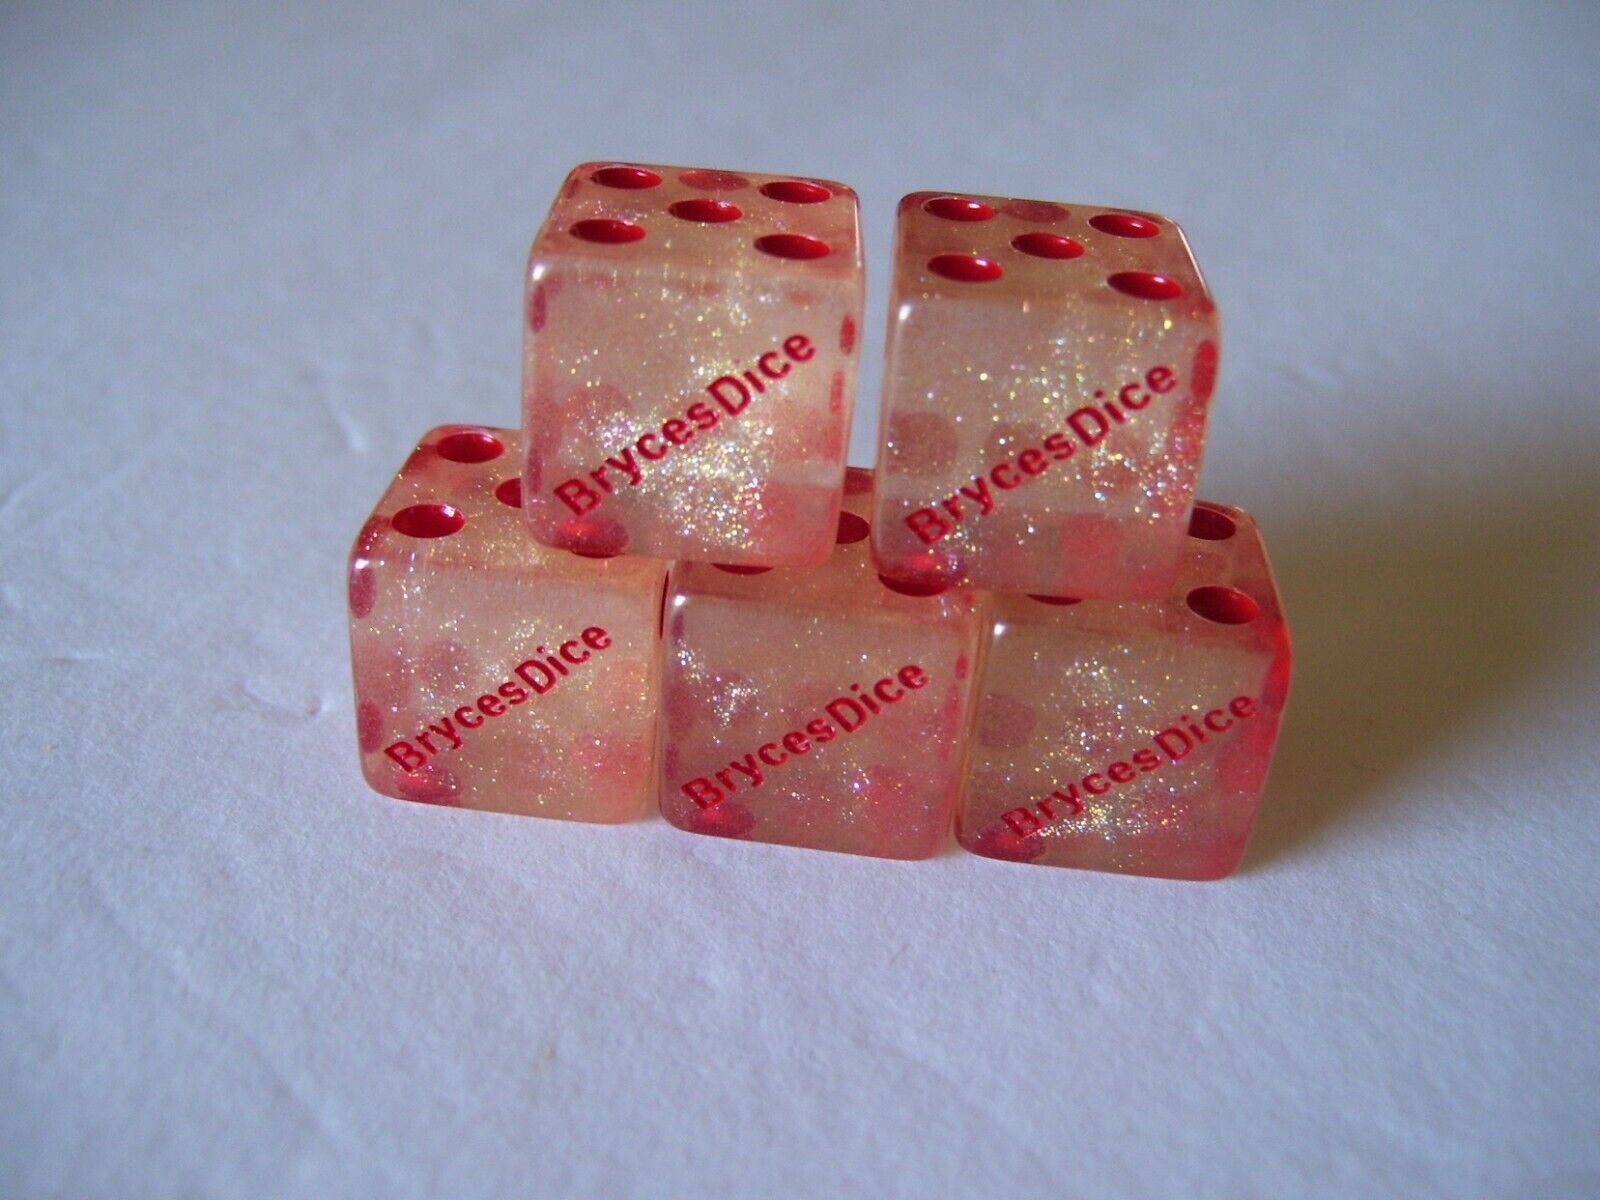 5 Awesome BryceDice Translucent Pink Spot Dice Set with Silver Sprinkles Inside 